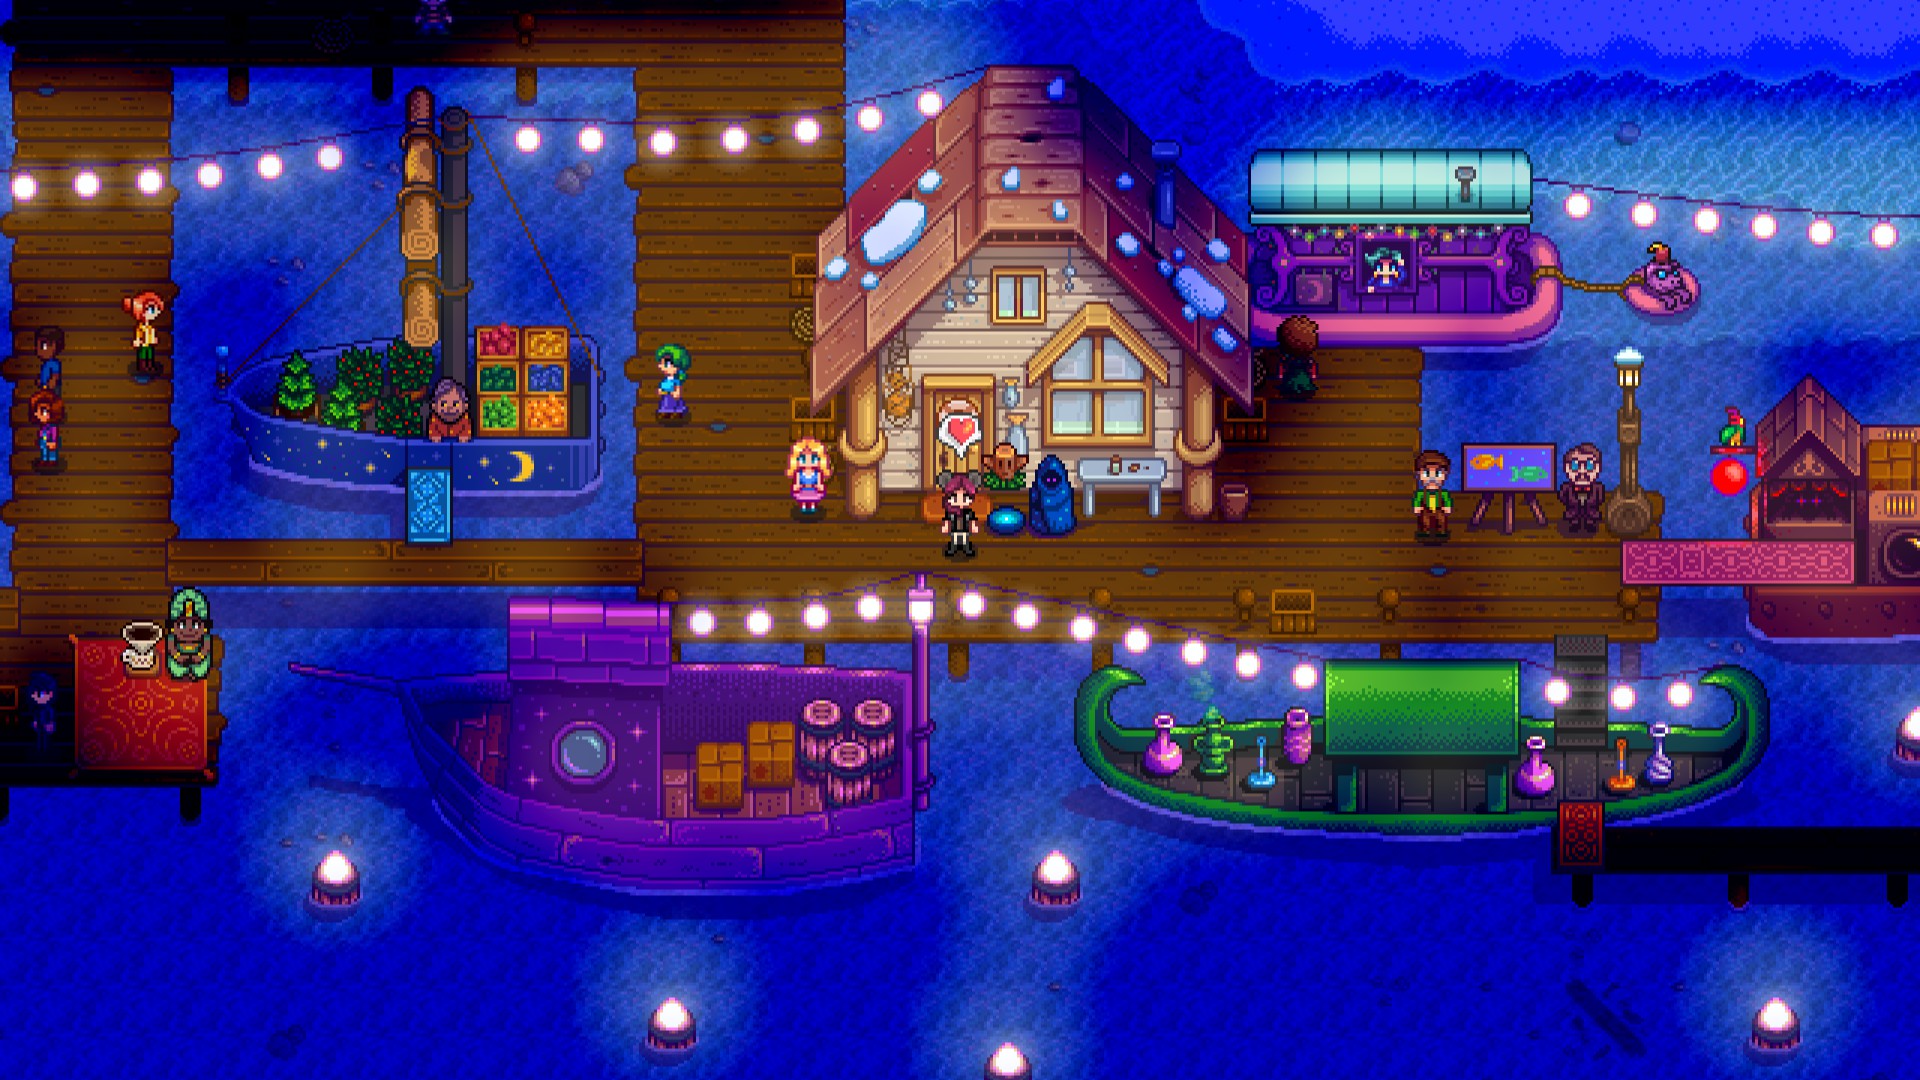 The Night Market Stardew Valley Guide